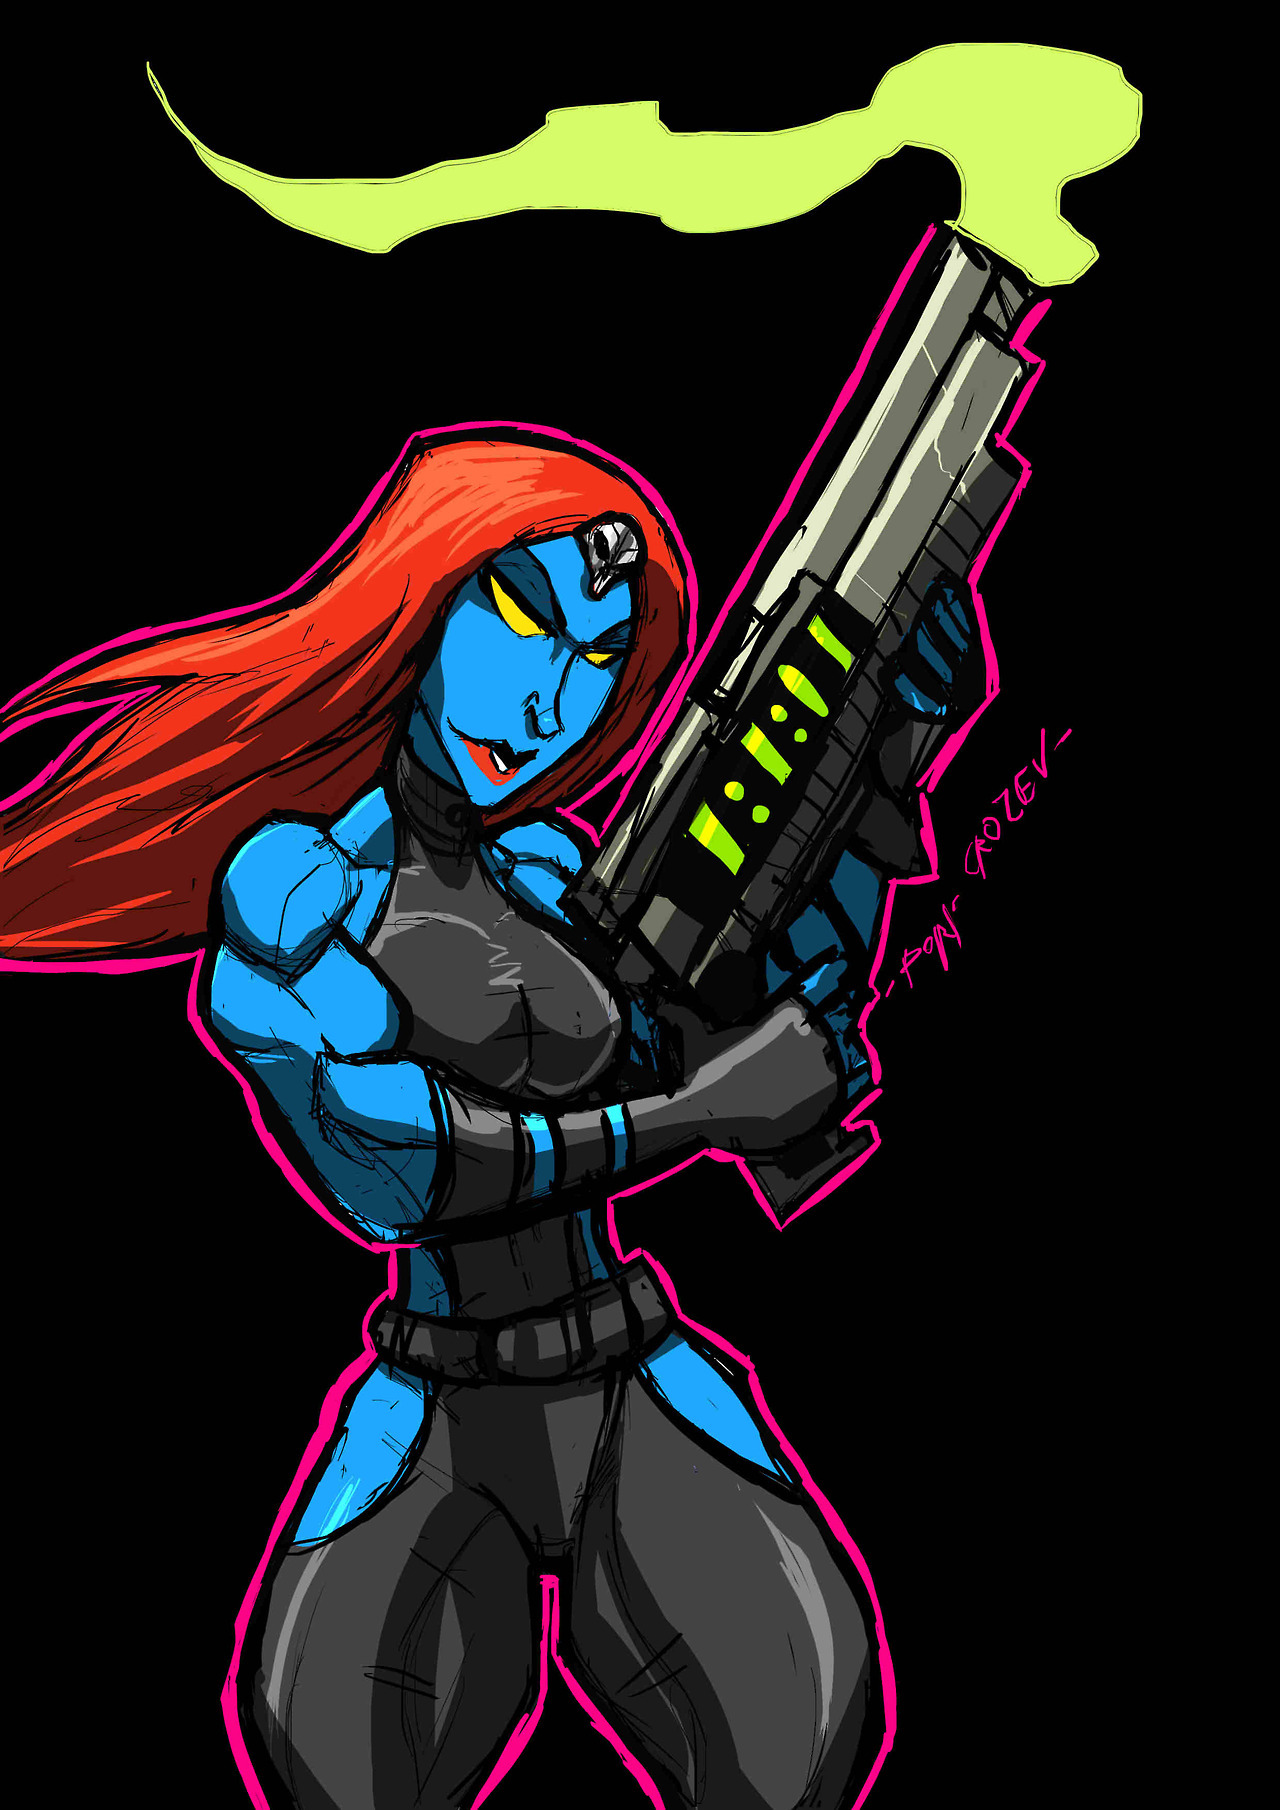 sabrerine911:  Was in the Brotherhood drawing mood so here is a mean Mystique with